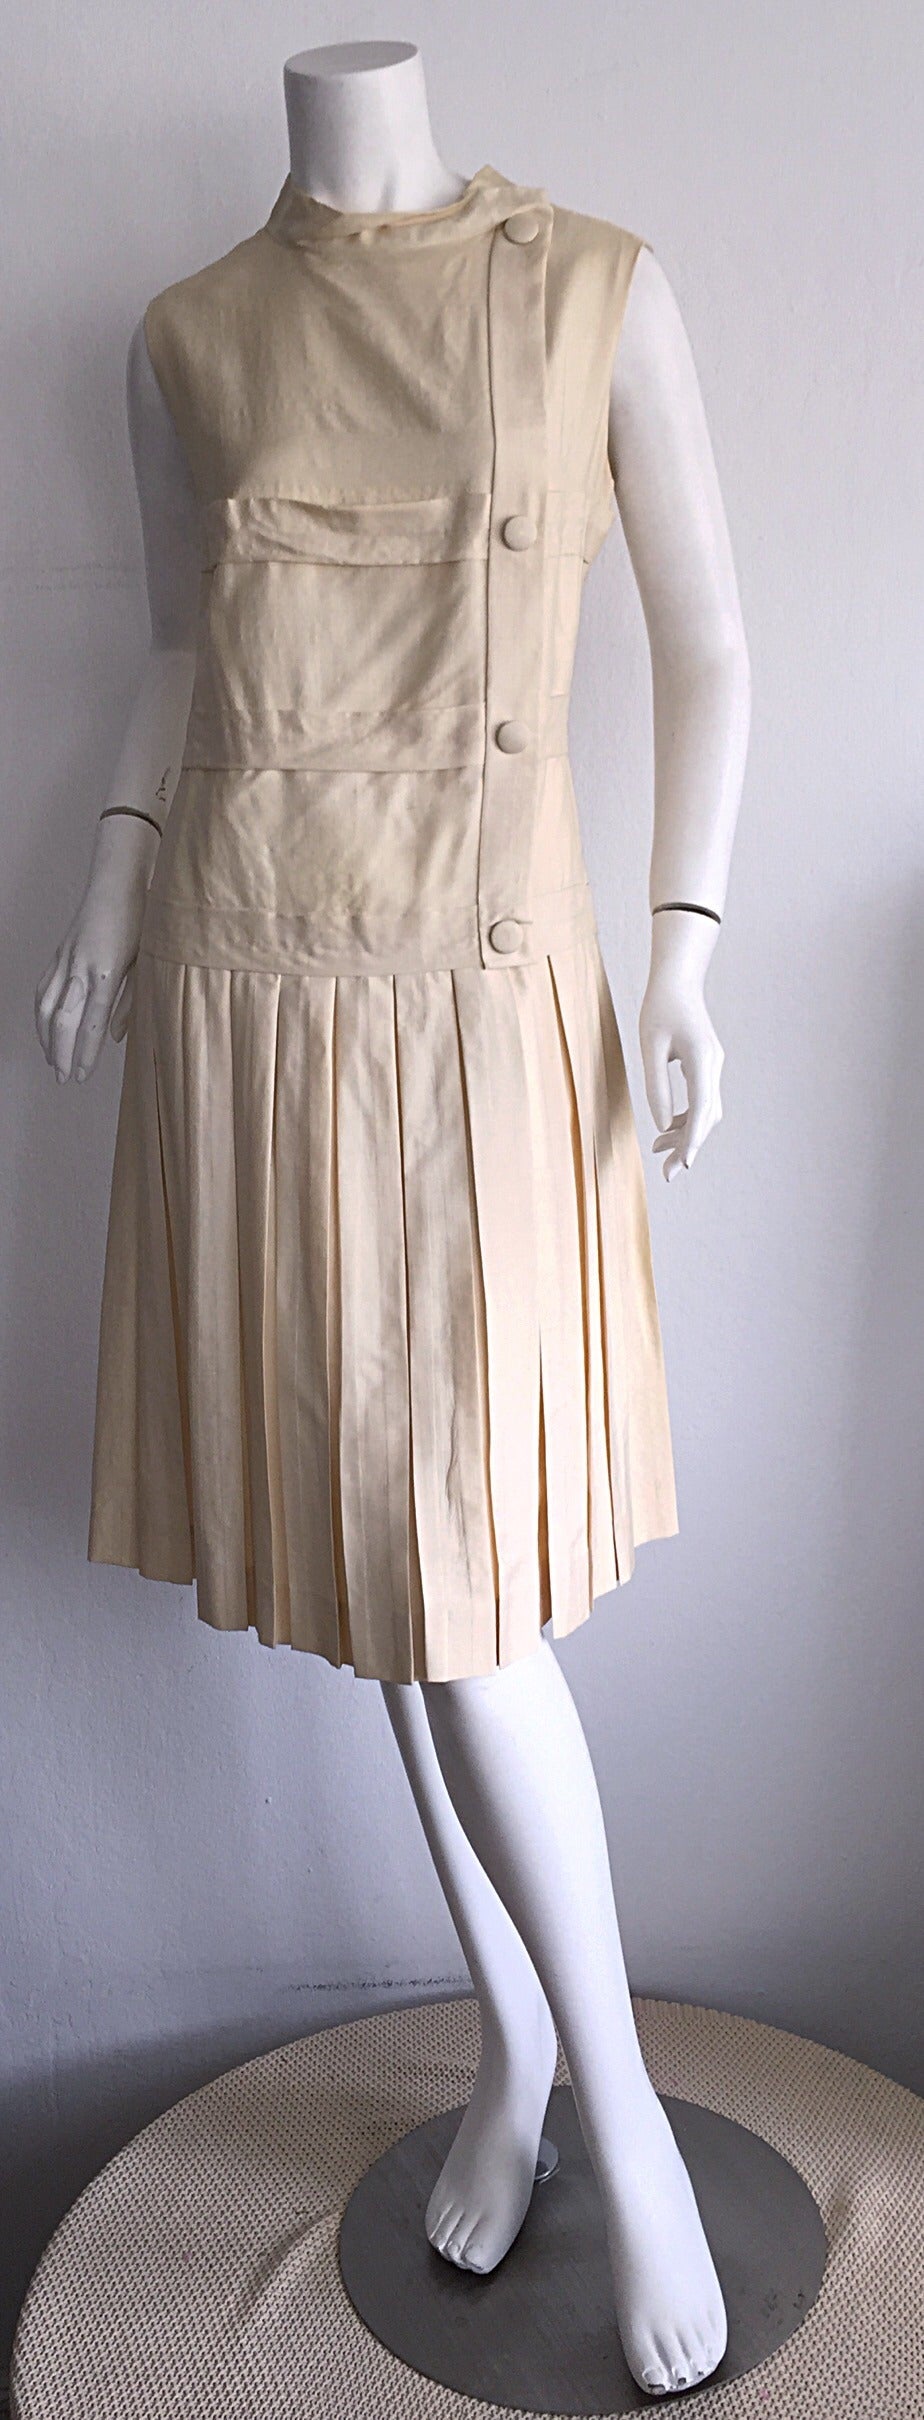 Extremely rare 1960s Elsa Schiaparelli ivory silk dress! Schiaparelli dresses are very hard to find, but when you do find one, the response is breathtaking!!! Ivory silk, with four buttons down the side bodice, and a fully pleated skirt, with a